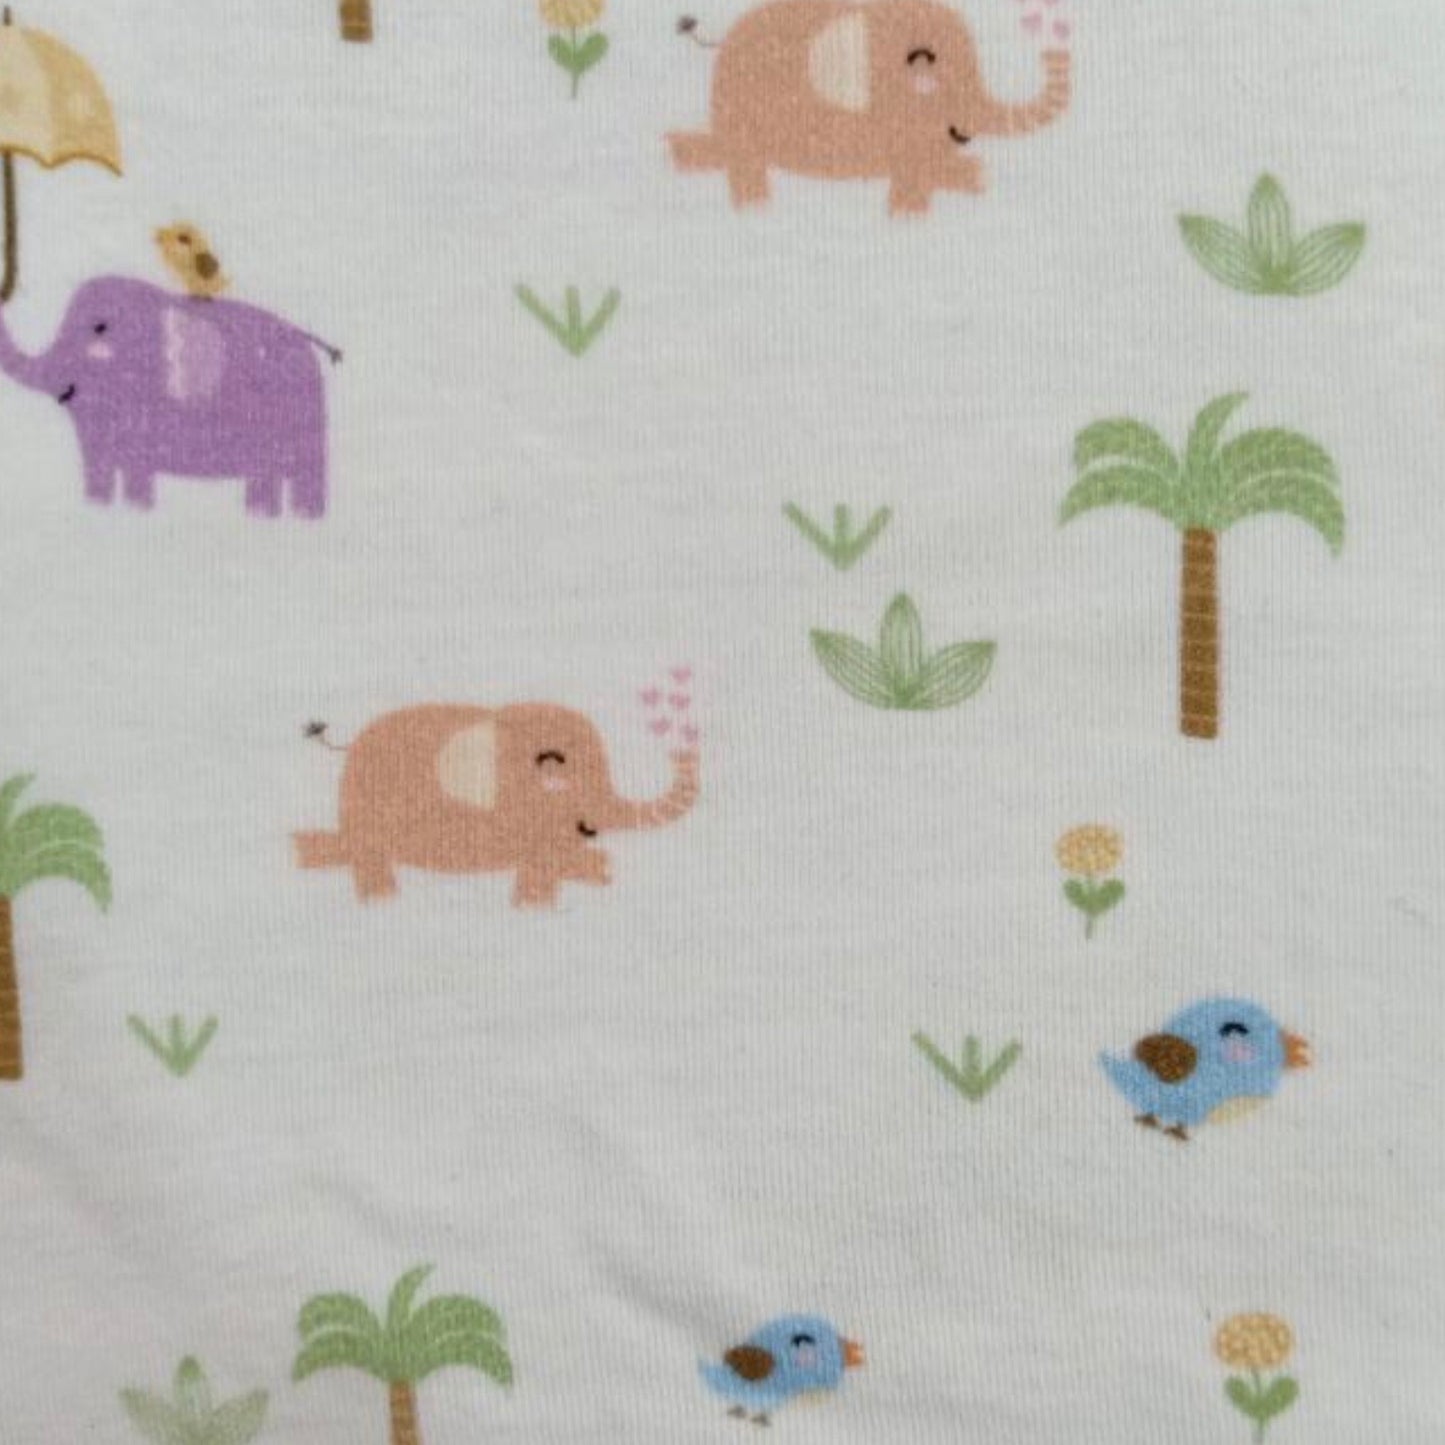 Elephants and birds - 2 way stretch 100% Cotton Jersey fabric - You’ve Got Me In Stitches